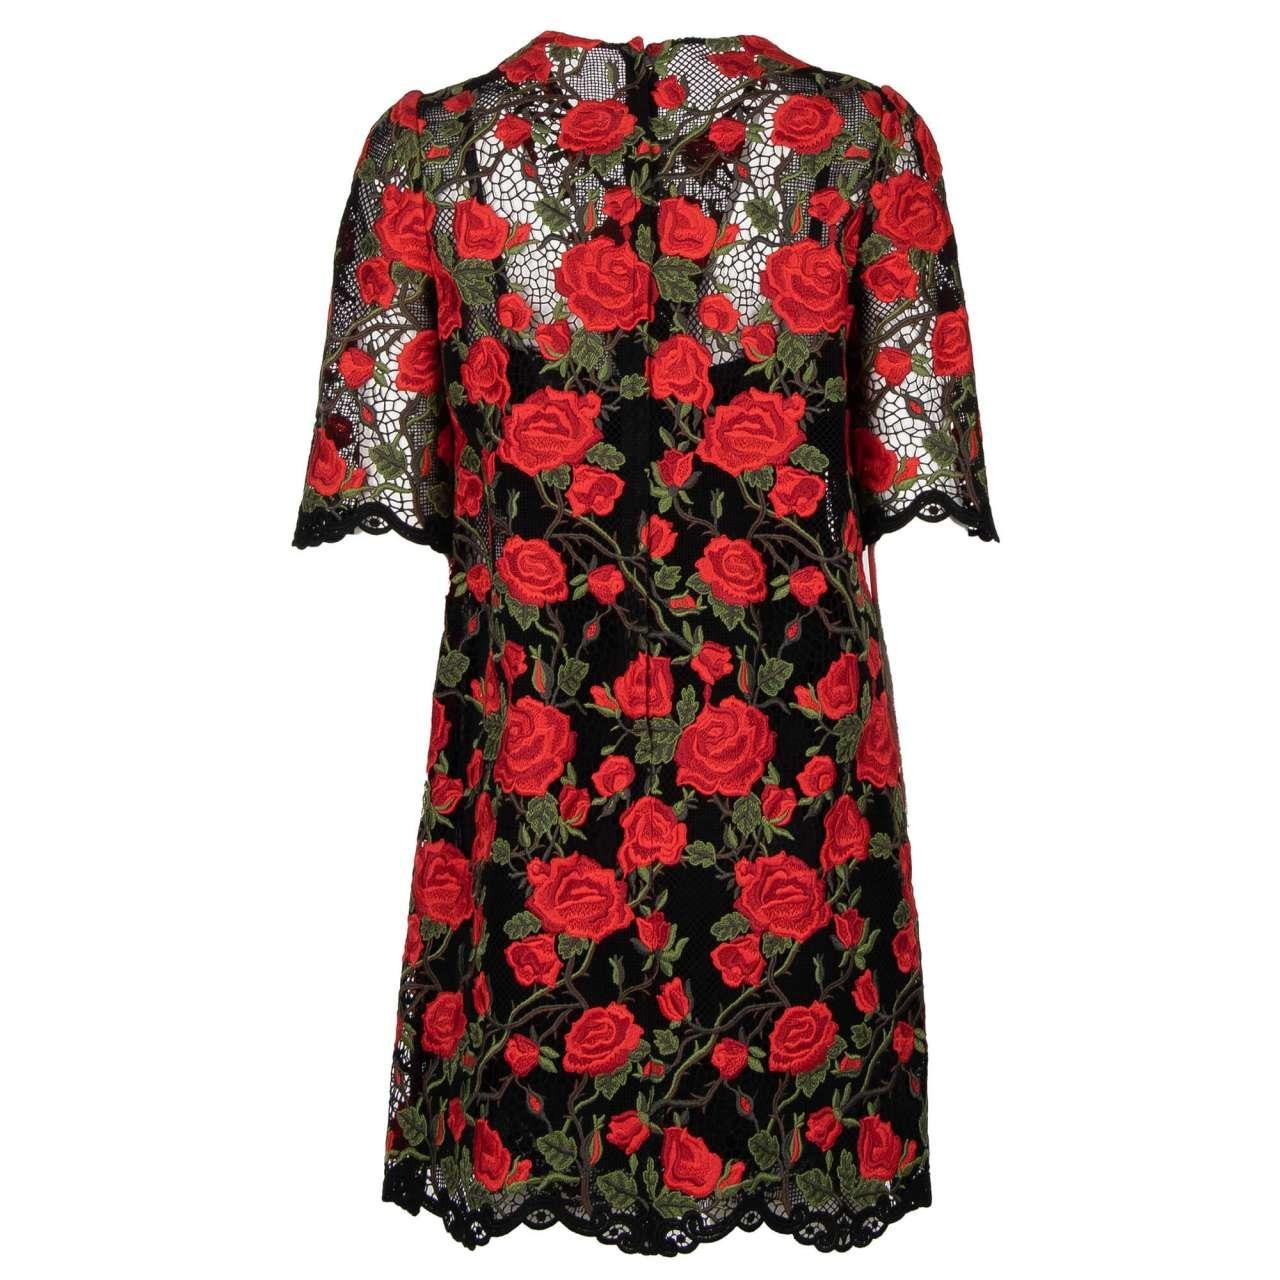 - Short macrame lace embroidered dress with roses in black and red by DOLCE & GABBANA - MADE IN ITALY - Former RRP: EUR 2.750 - New with Tag - Including silk underdress - Macrame lace with roses embroidery and net structure - Rear zip closure -